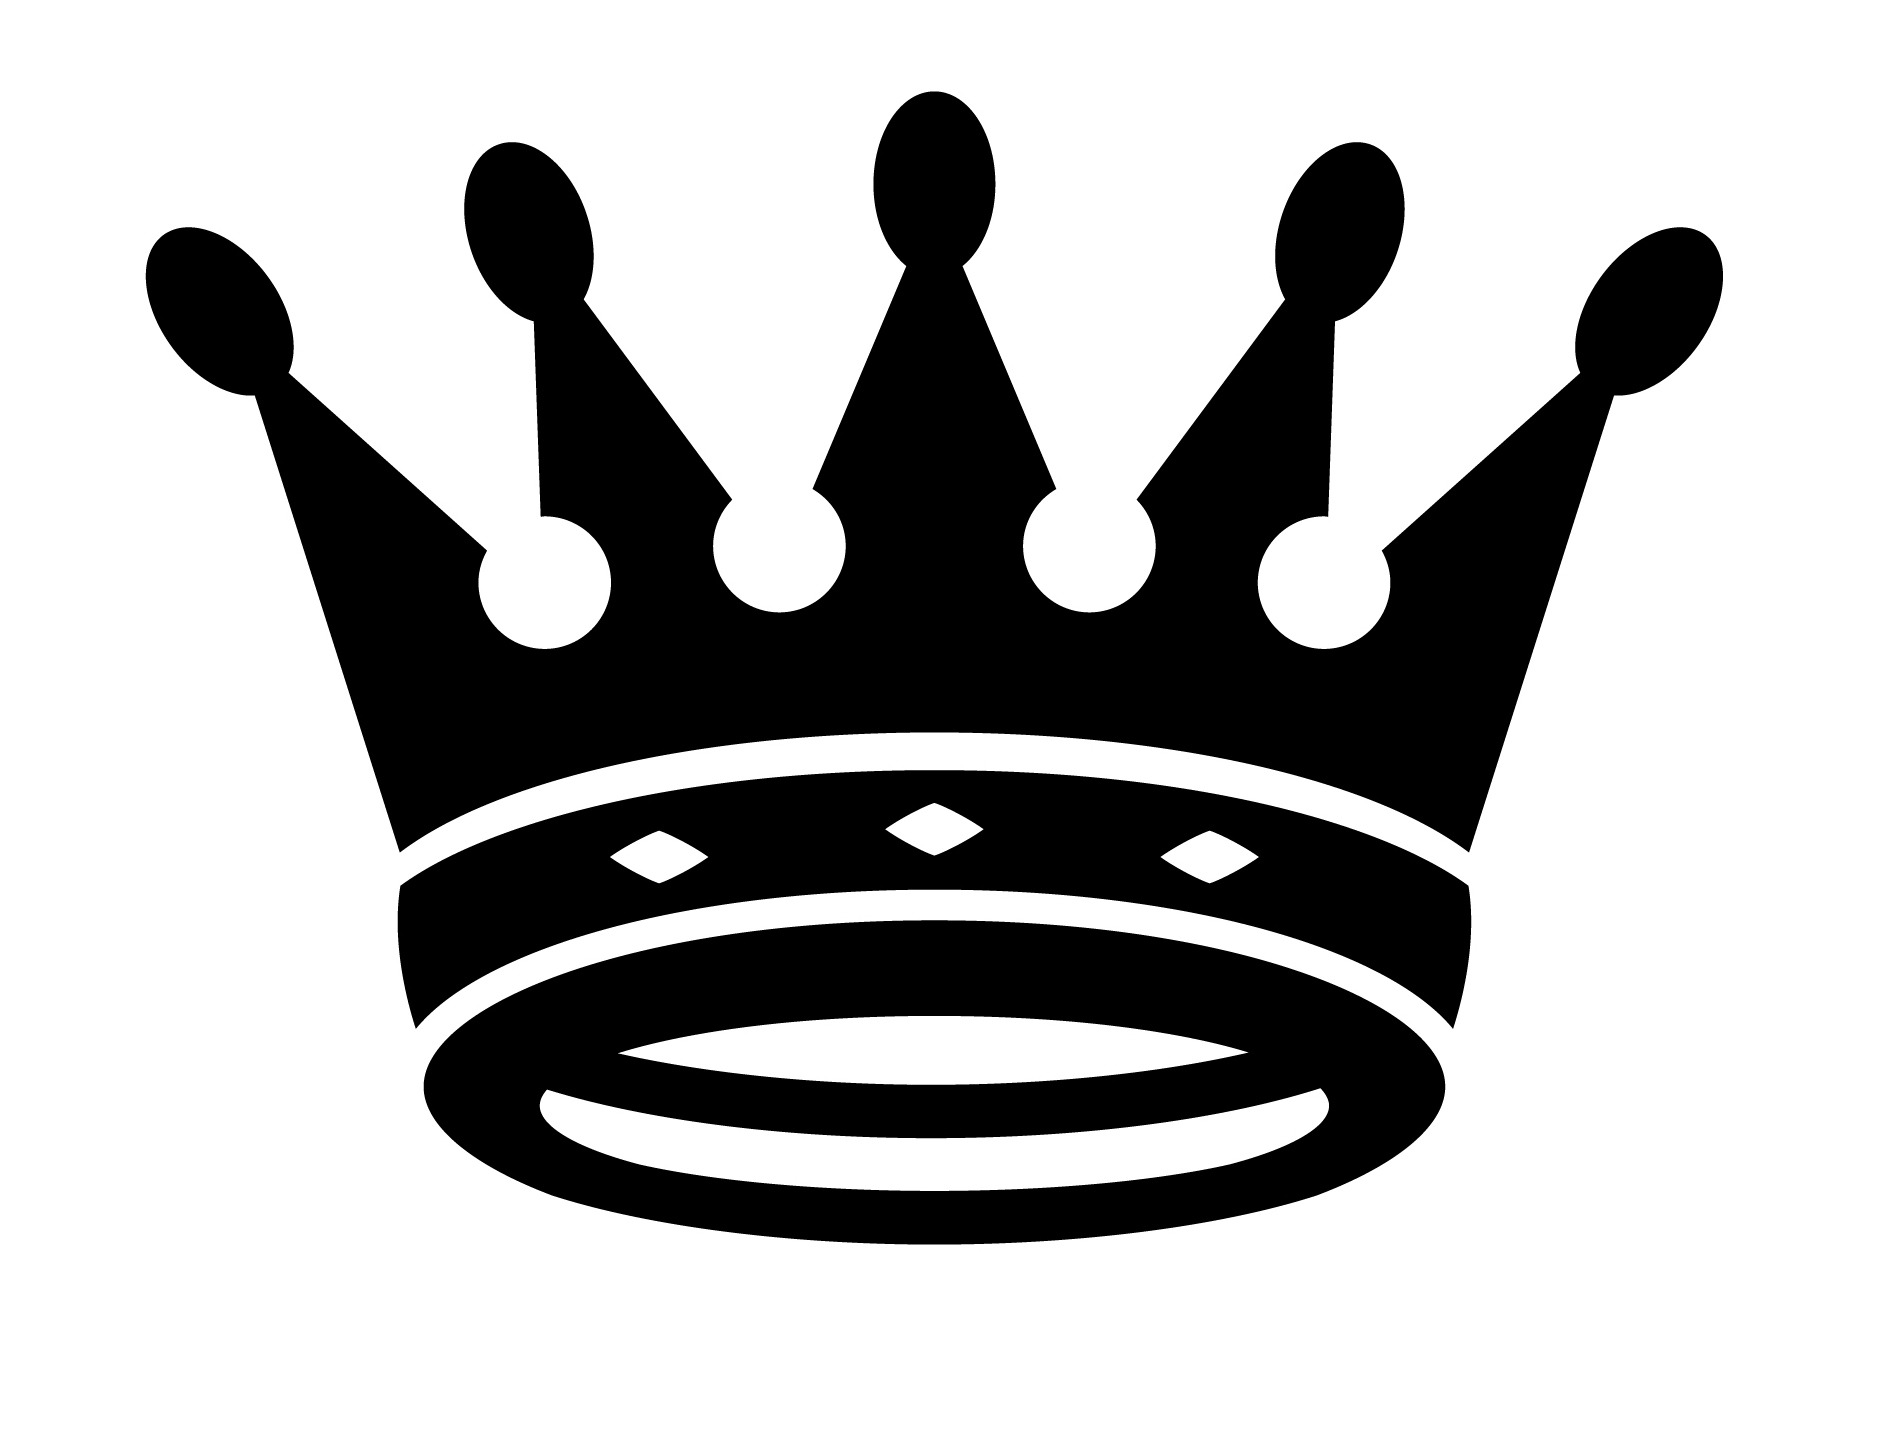 Free King Crown, Download Free Clip Art, Free Clip Art on.